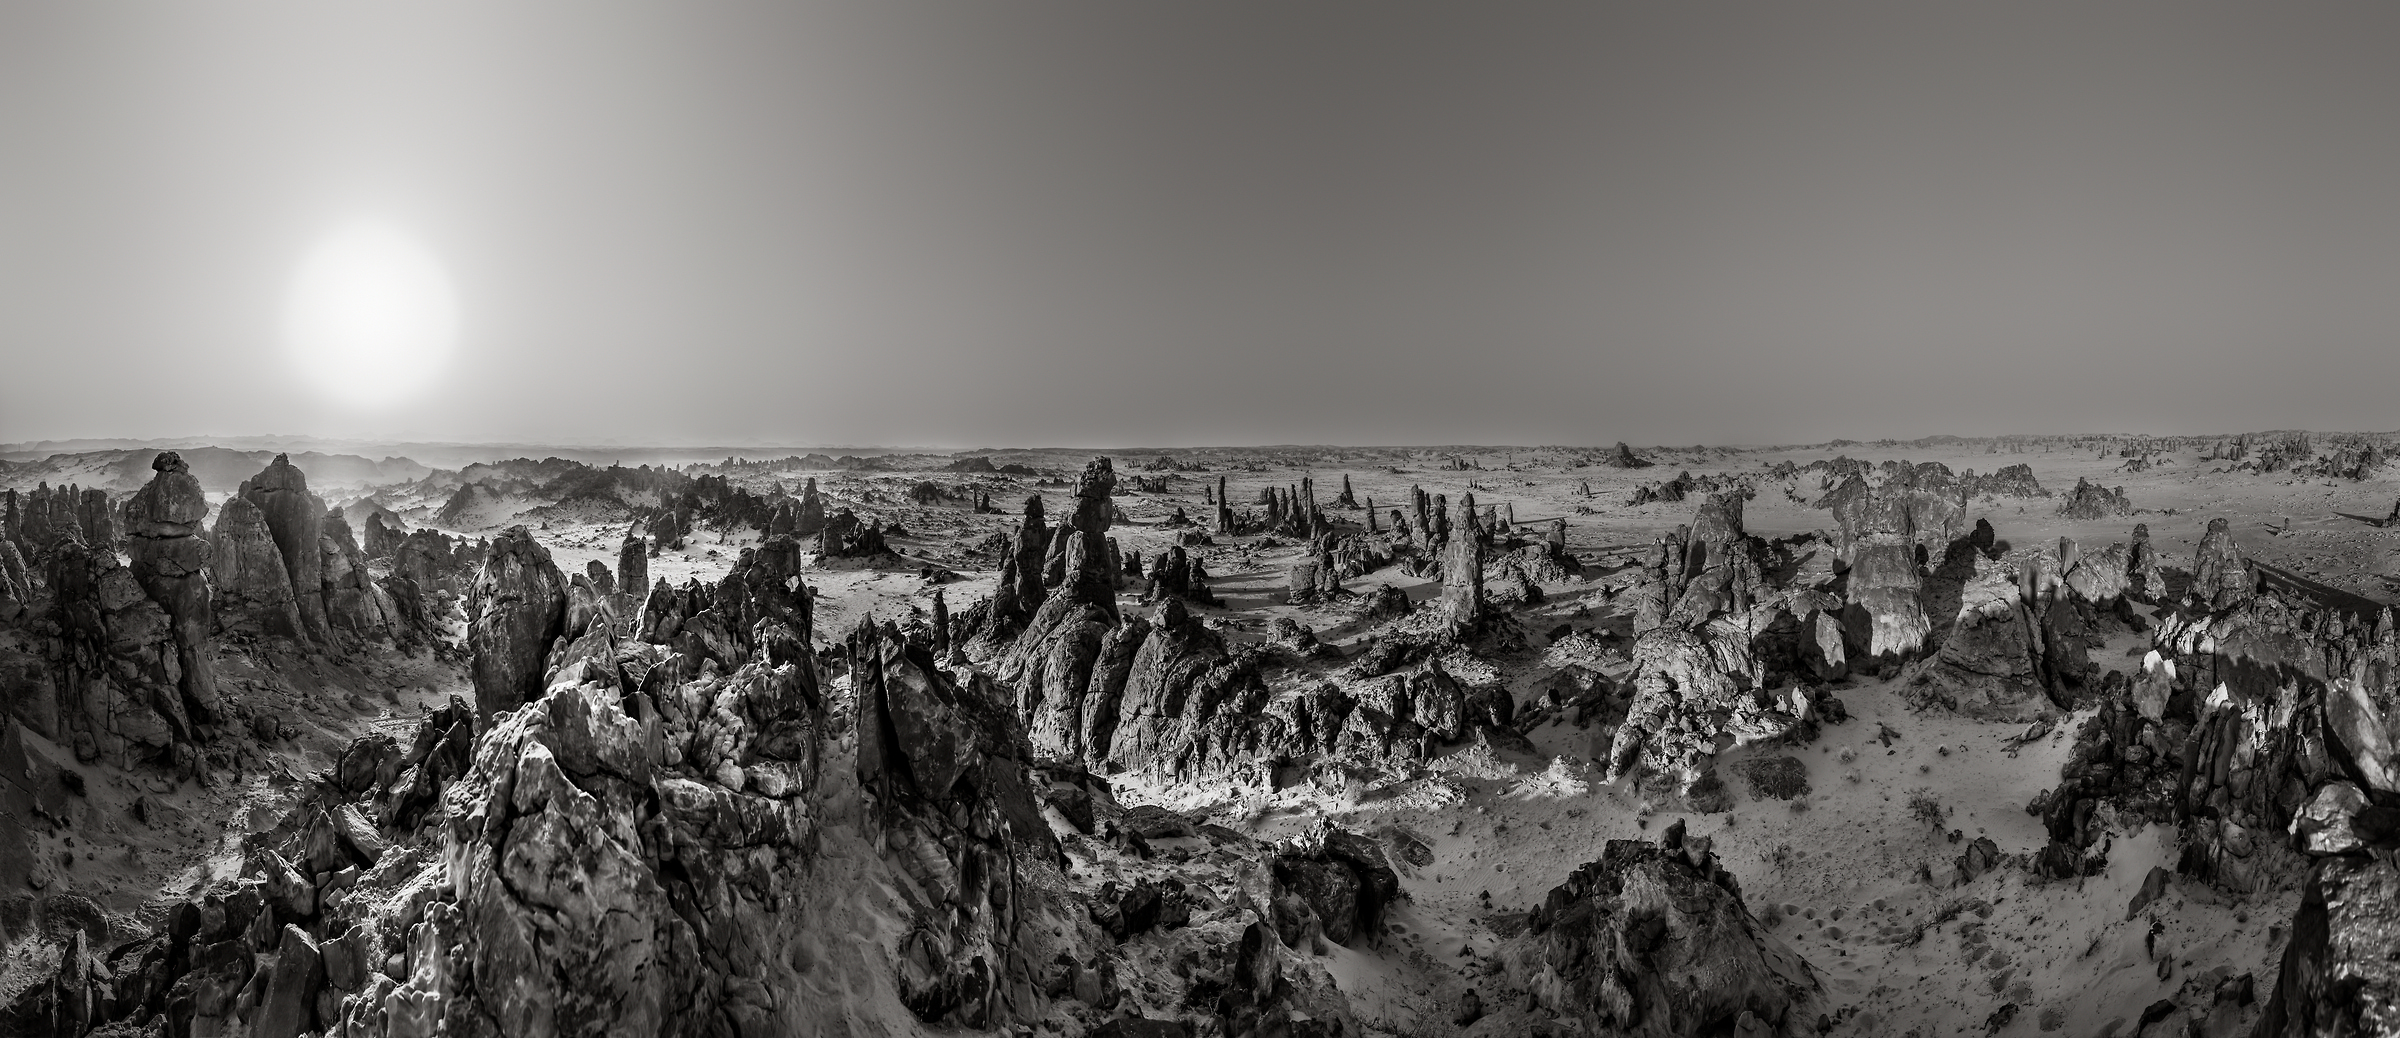 727 megapixels! A very high resolution, large-format fine art photo print of a landscape in the Arabian Desert; black & white photograph created by Peter Rodger in Al Ula, Saudi Arabia.